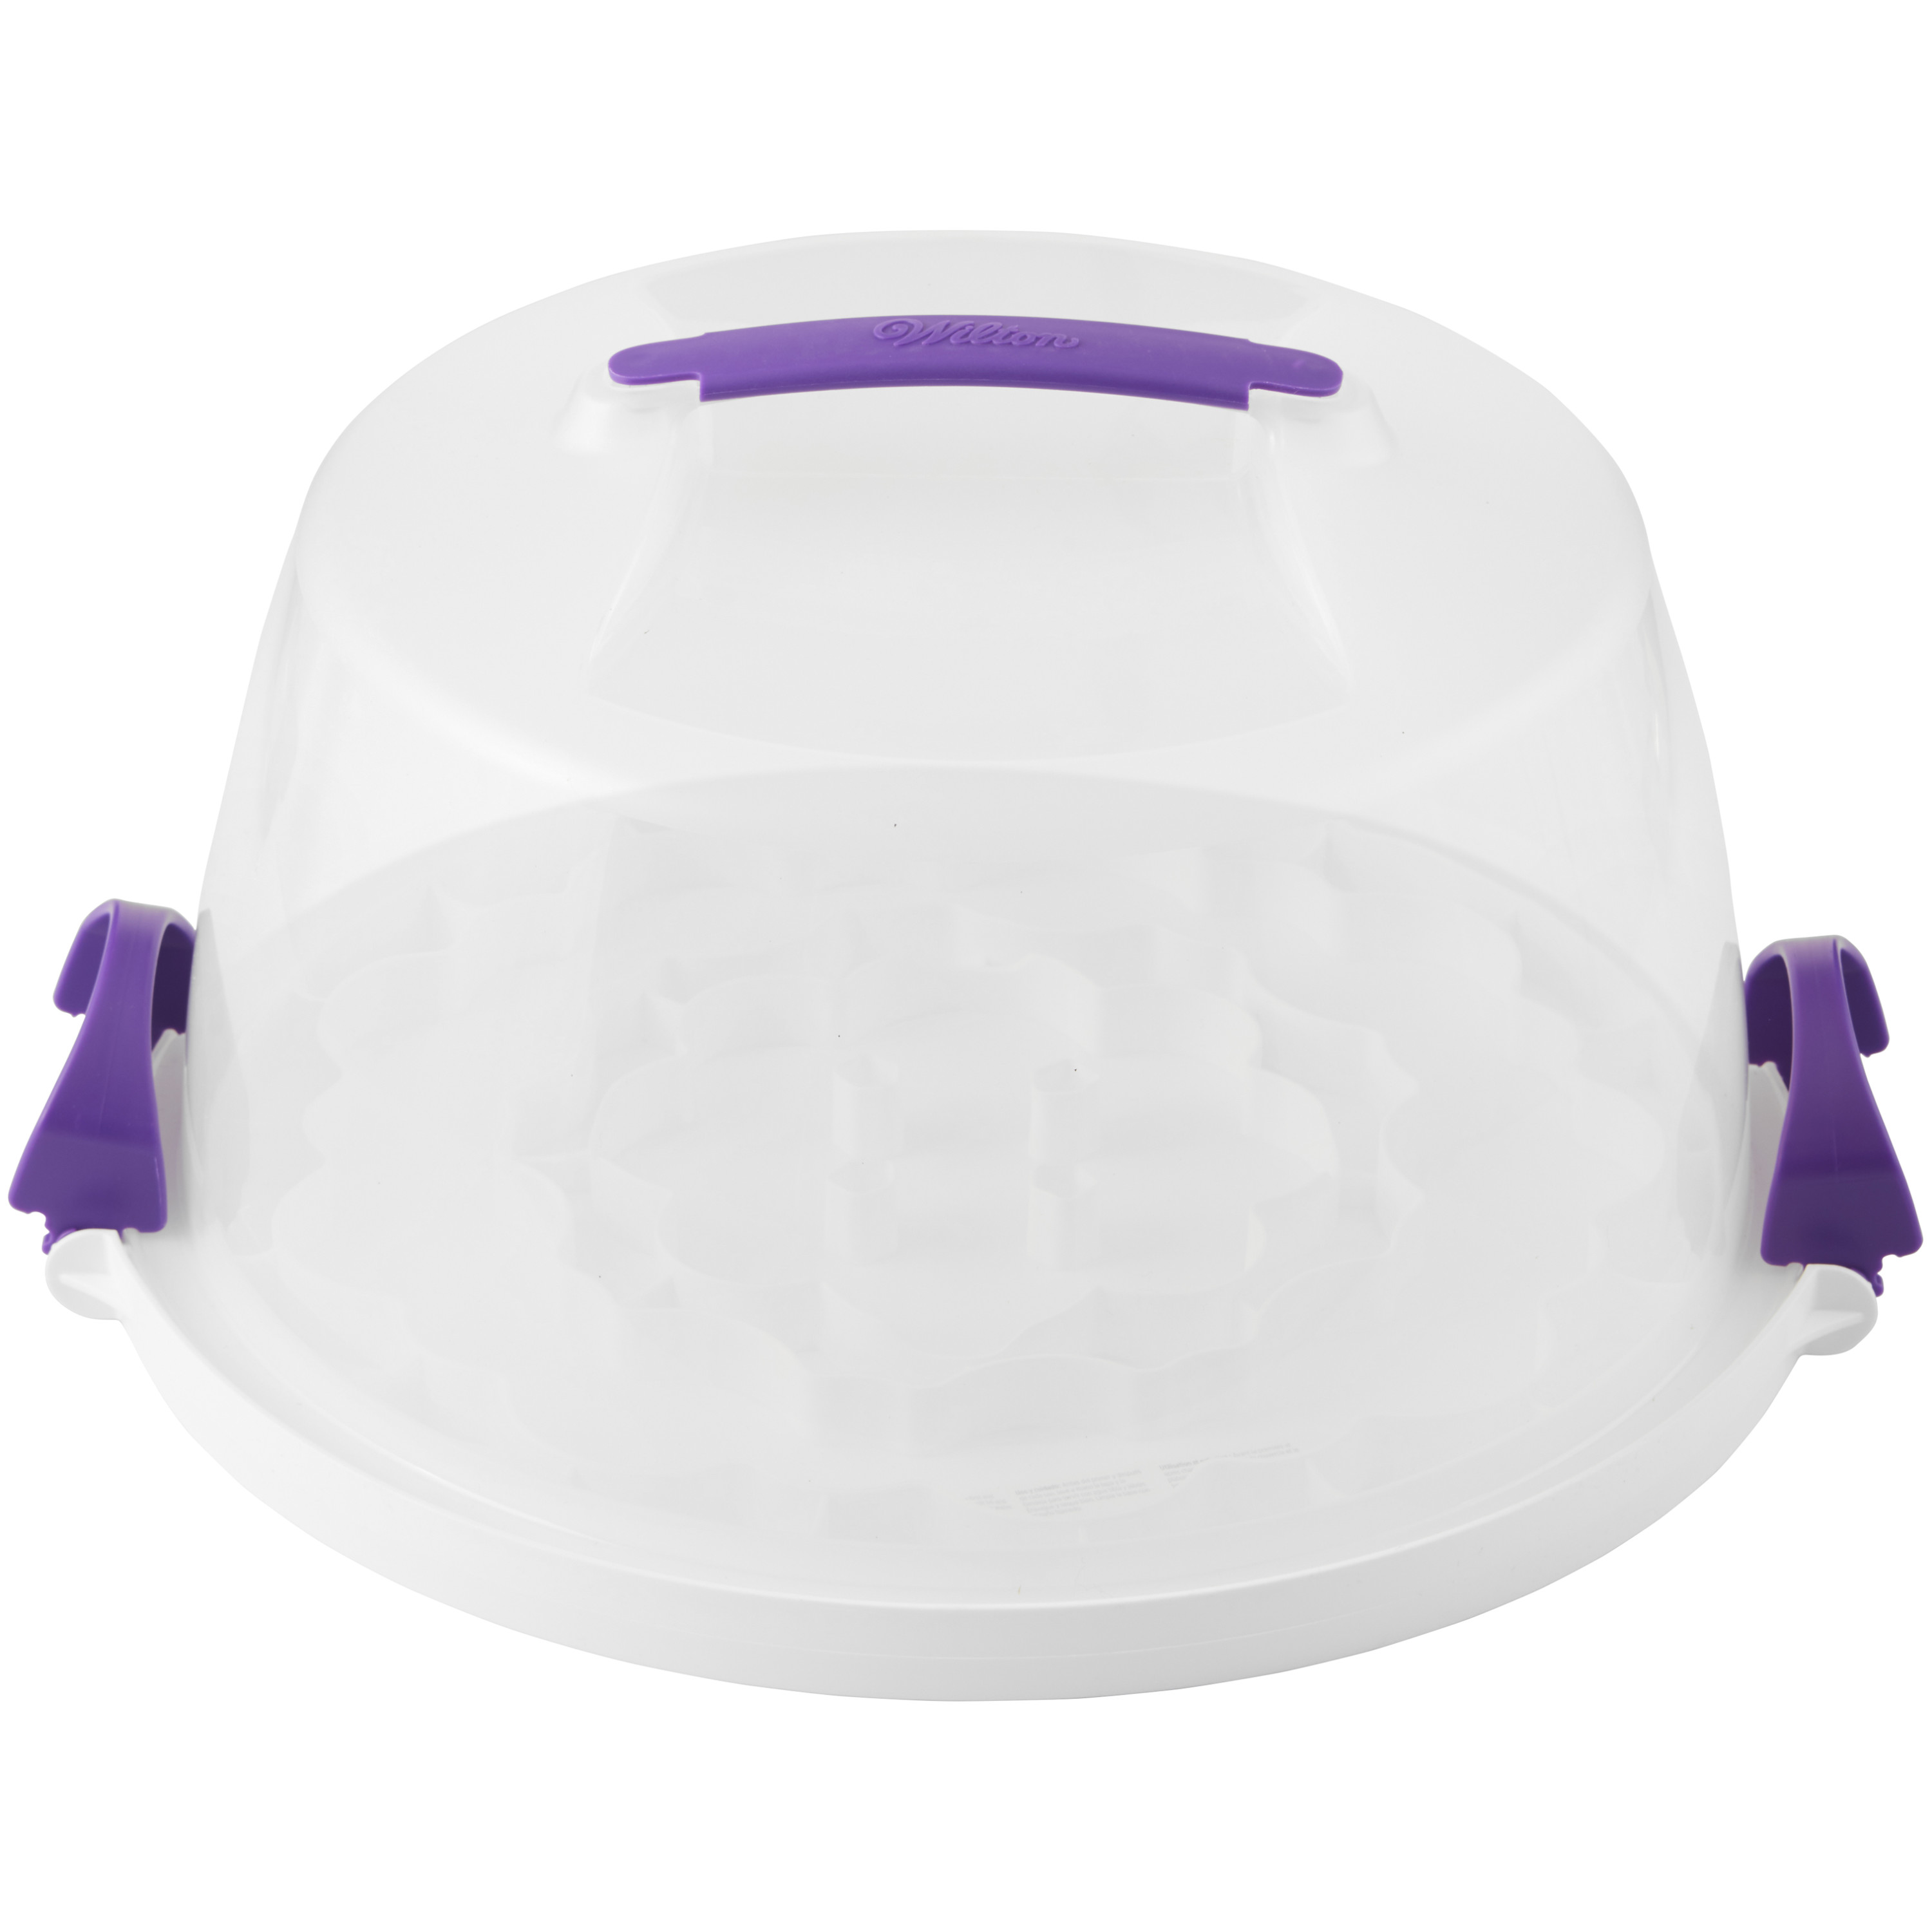 Wilton Cake and Cupcake Carrier, Fits 10 inch Cake or 13 Standard Cupcakes, 2.07 oz. - image 1 of 5